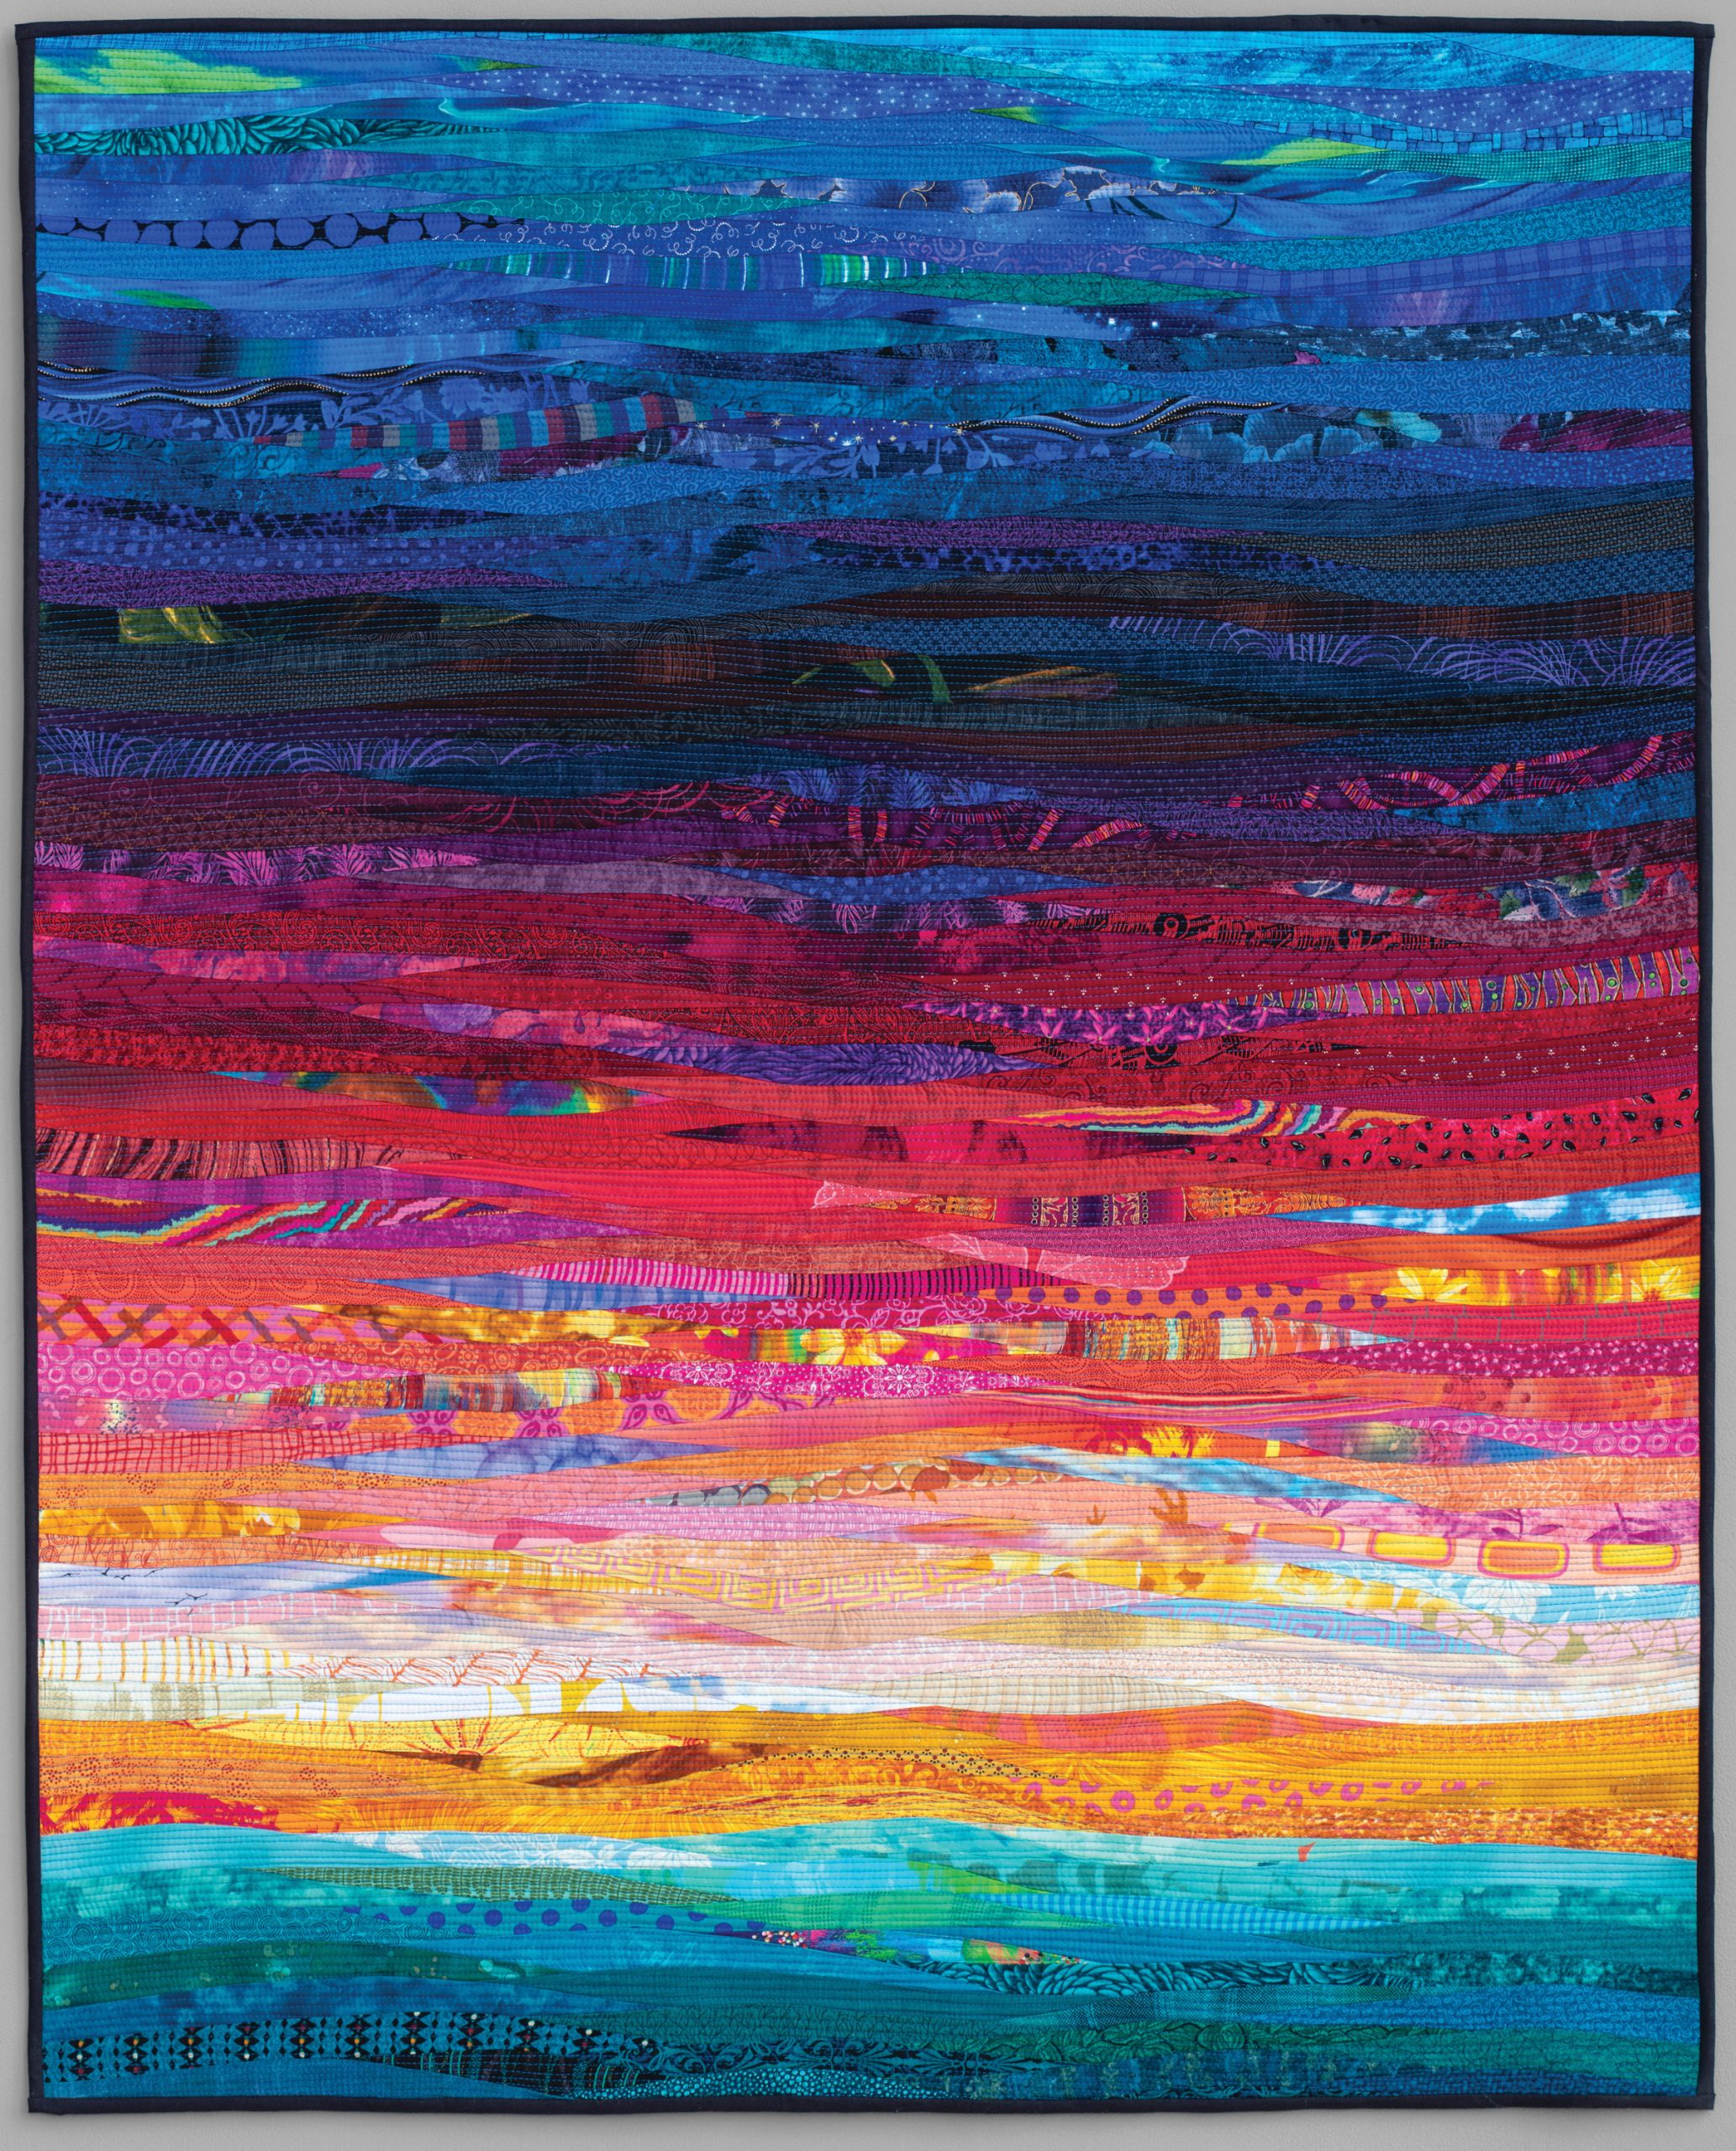 Ann Brauer is an award-winning quilt artist with works in many public and private collections. "Ocean Sunrise": quilt; 37" x 46". Shelburne Falls, MA